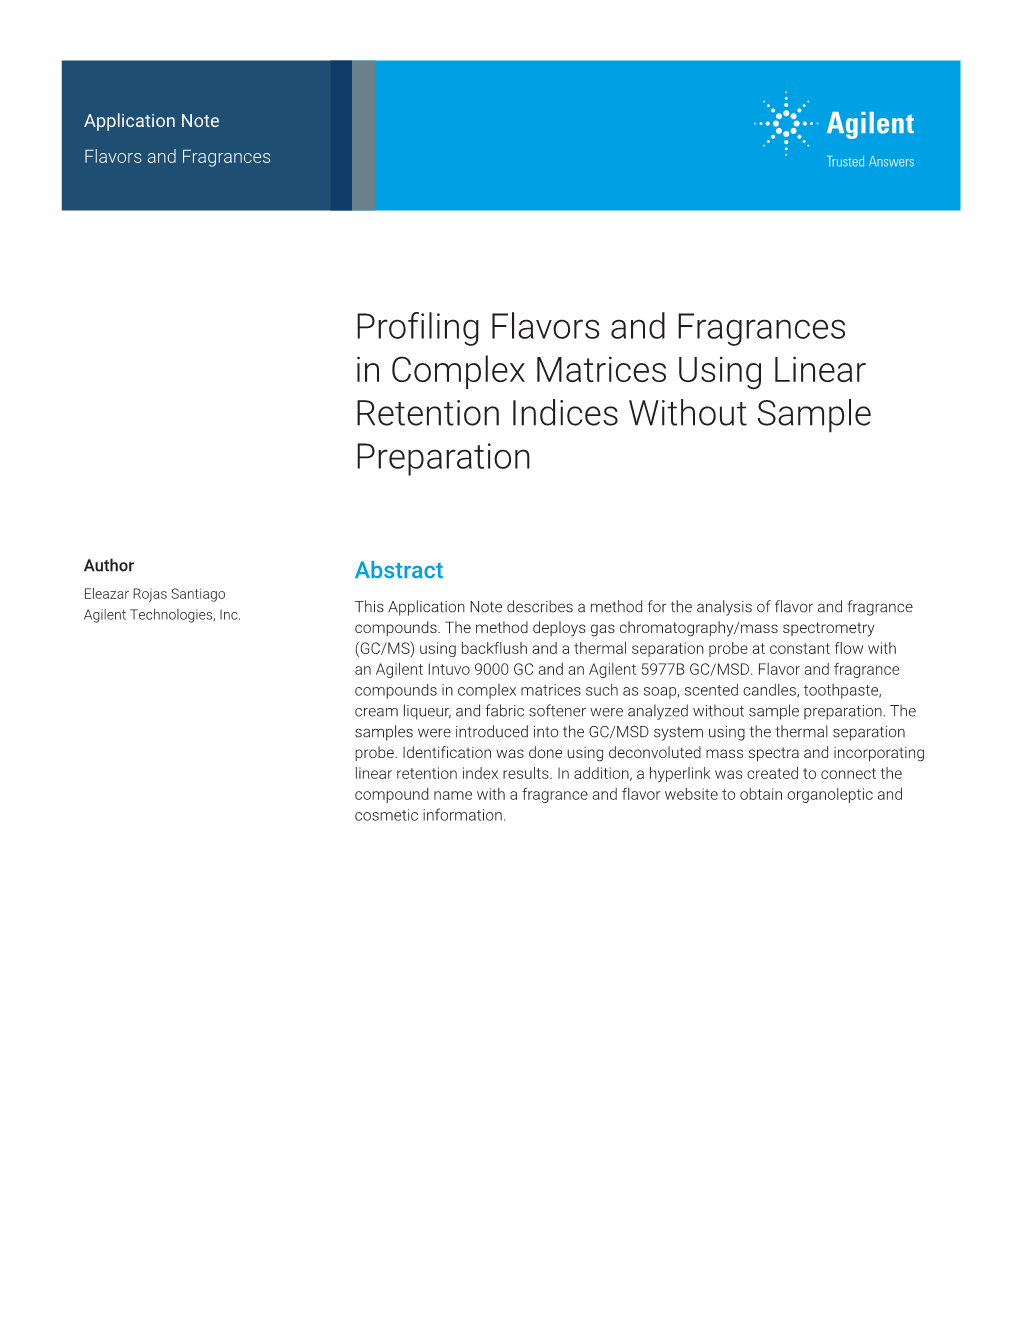 Profiling Flavors and Fragrances in Complex Matrices Using Linear Retention Indices Without Sample Preparation